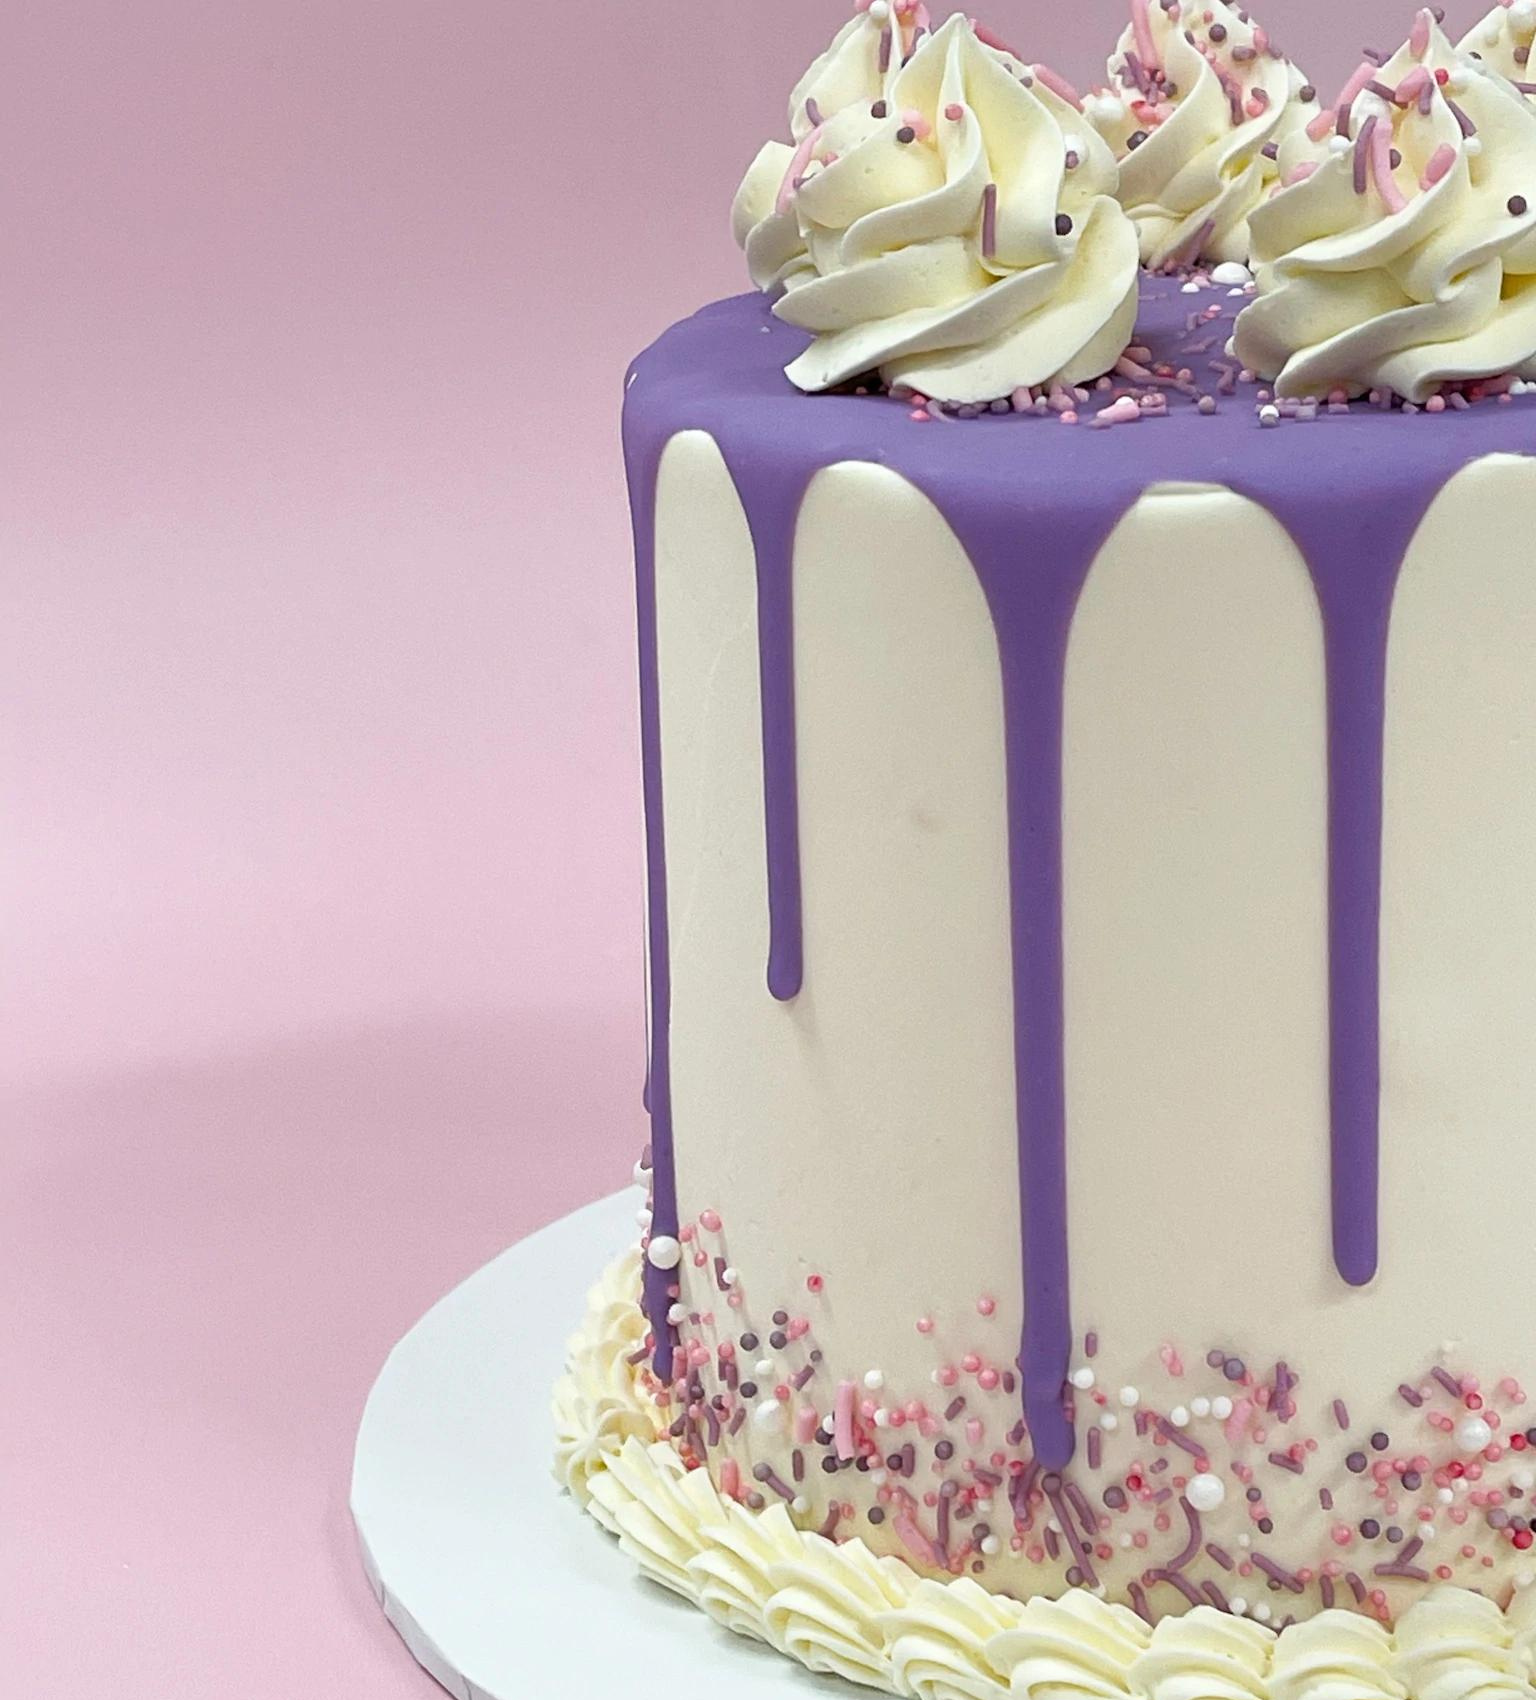 Create Your Own Colourful Dessert Cake